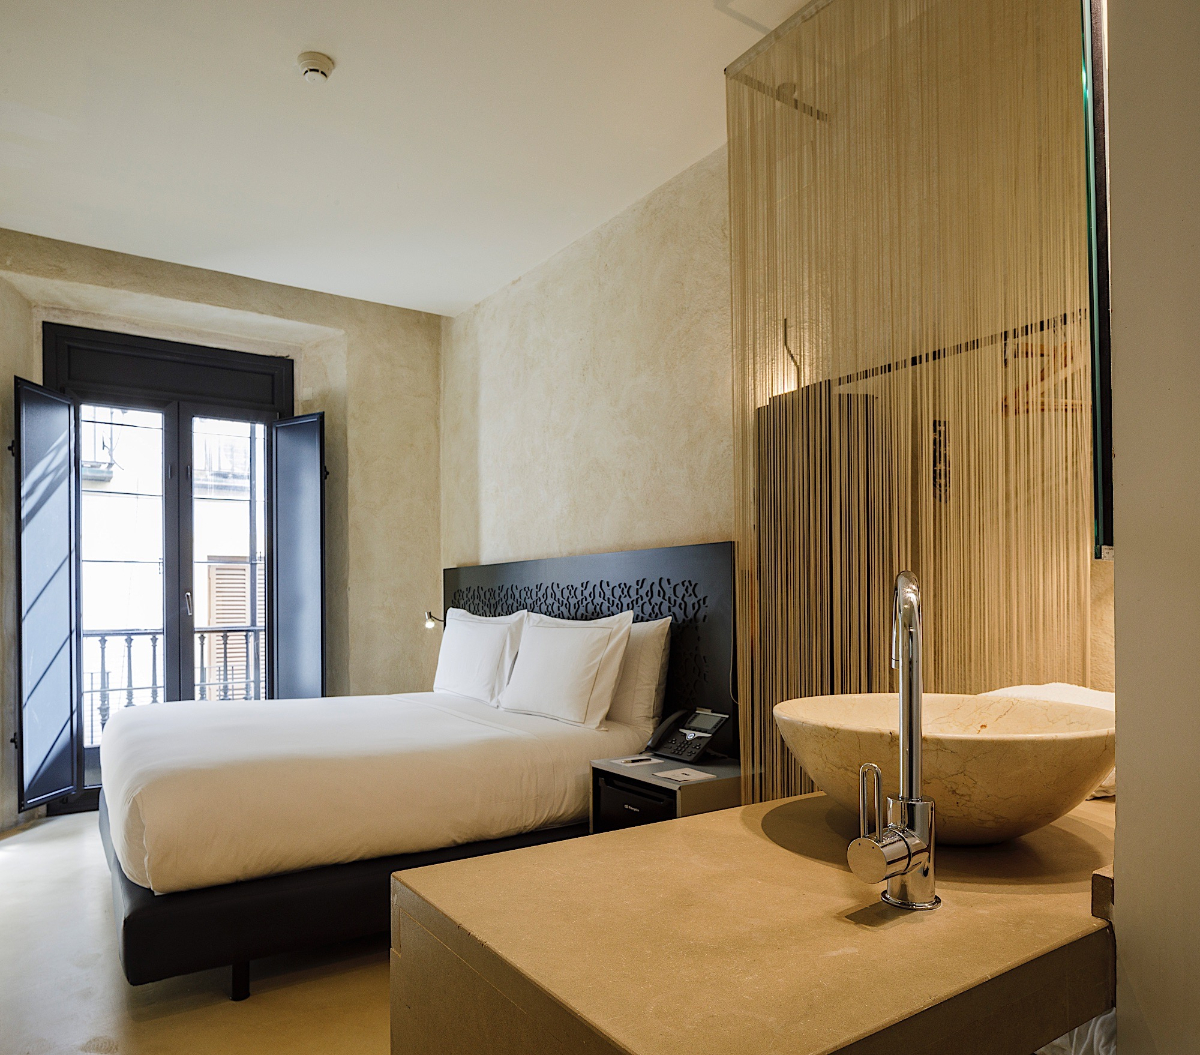 Bed and bathroom of the Superior Room at the EME Catedral Mercer Hotel